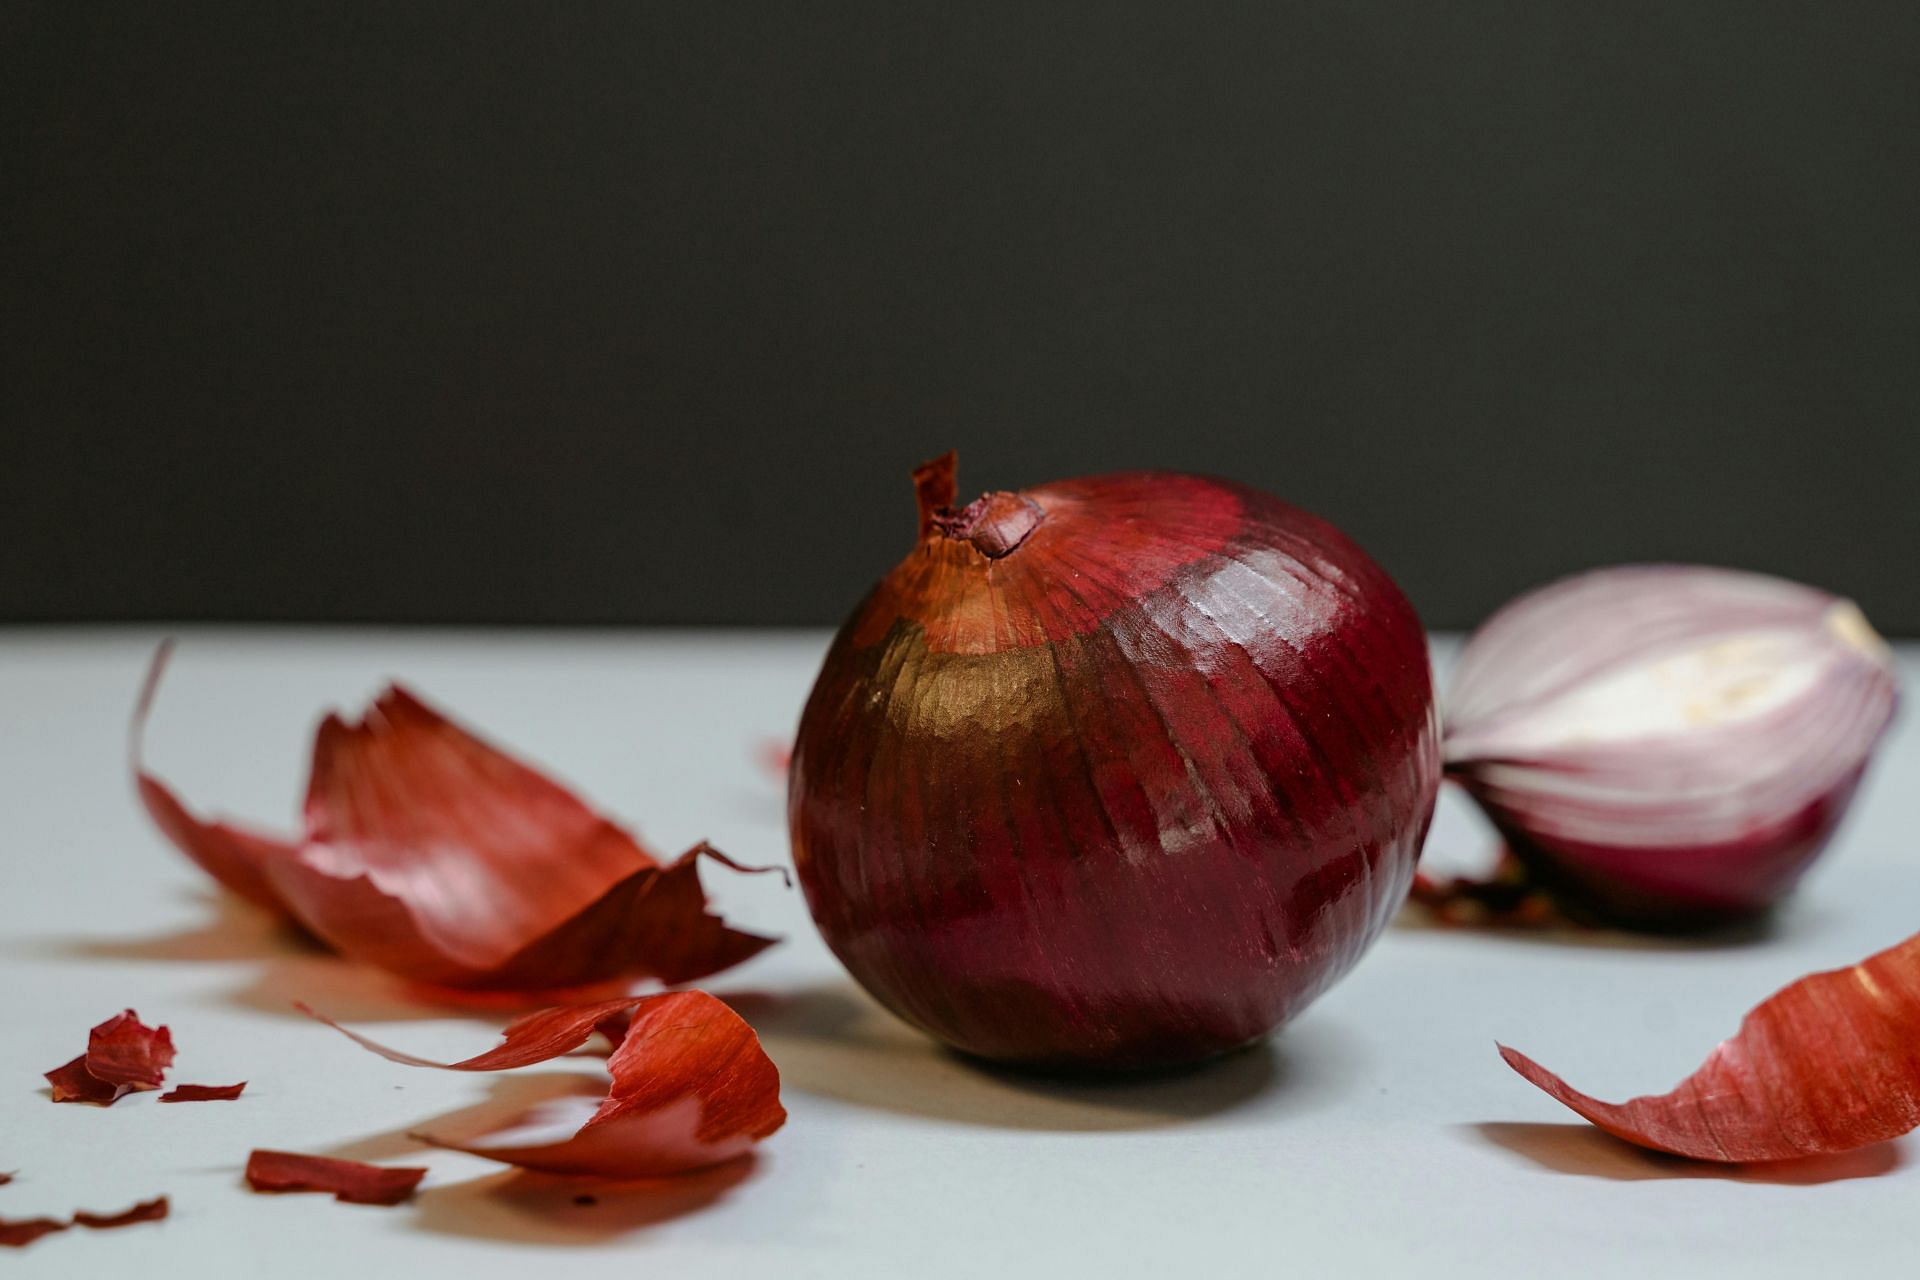 Importance of onion peels (image sourced via Pexels / Photo by mart productions)